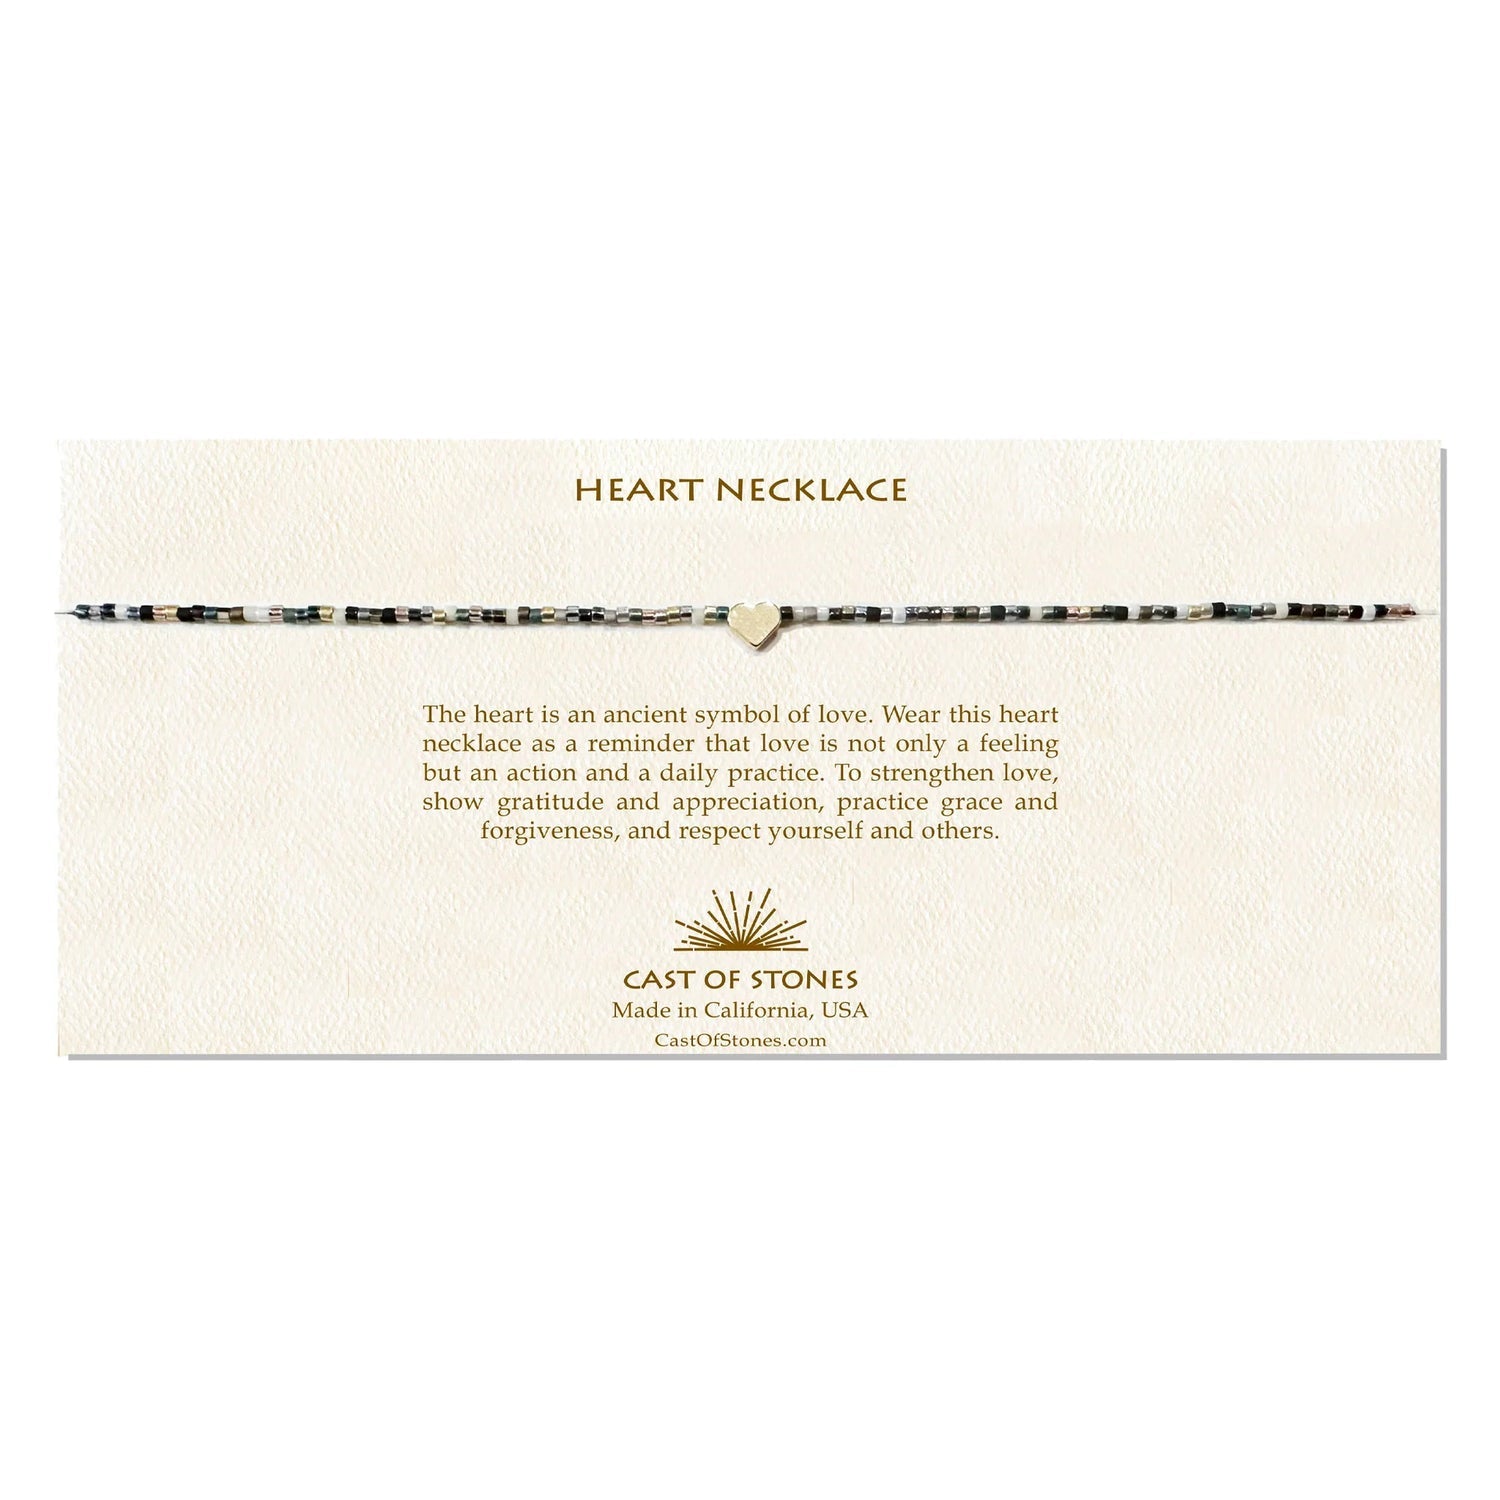 Cast-of-Stones-Heart-Necklace-Neutral-with-Information-Card.jpg